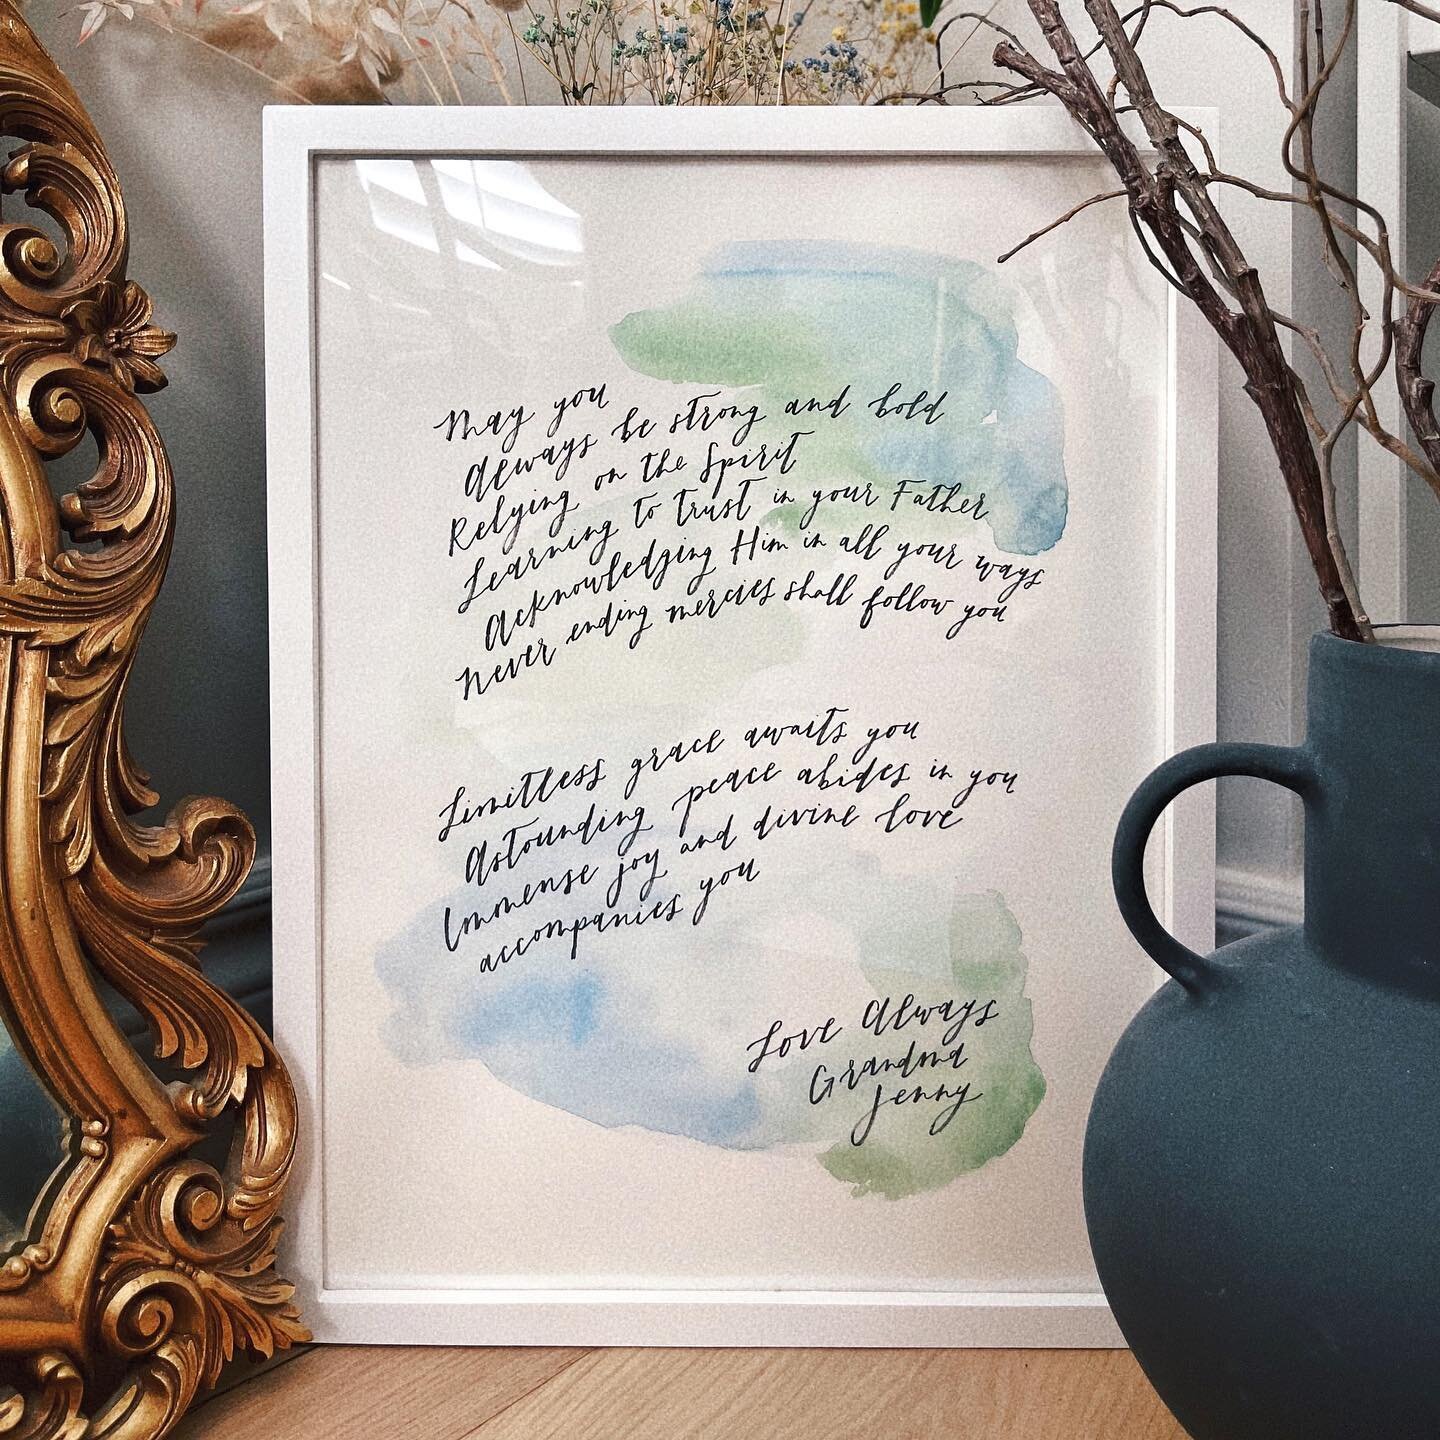 I&rsquo;ve been going through my photo archives and there&rsquo;s so much work I haven&rsquo;t shared. This was a special custom commission I did last year for my aunt who wrote a poem dedicated to her new grandson. I also painted one for her grandda